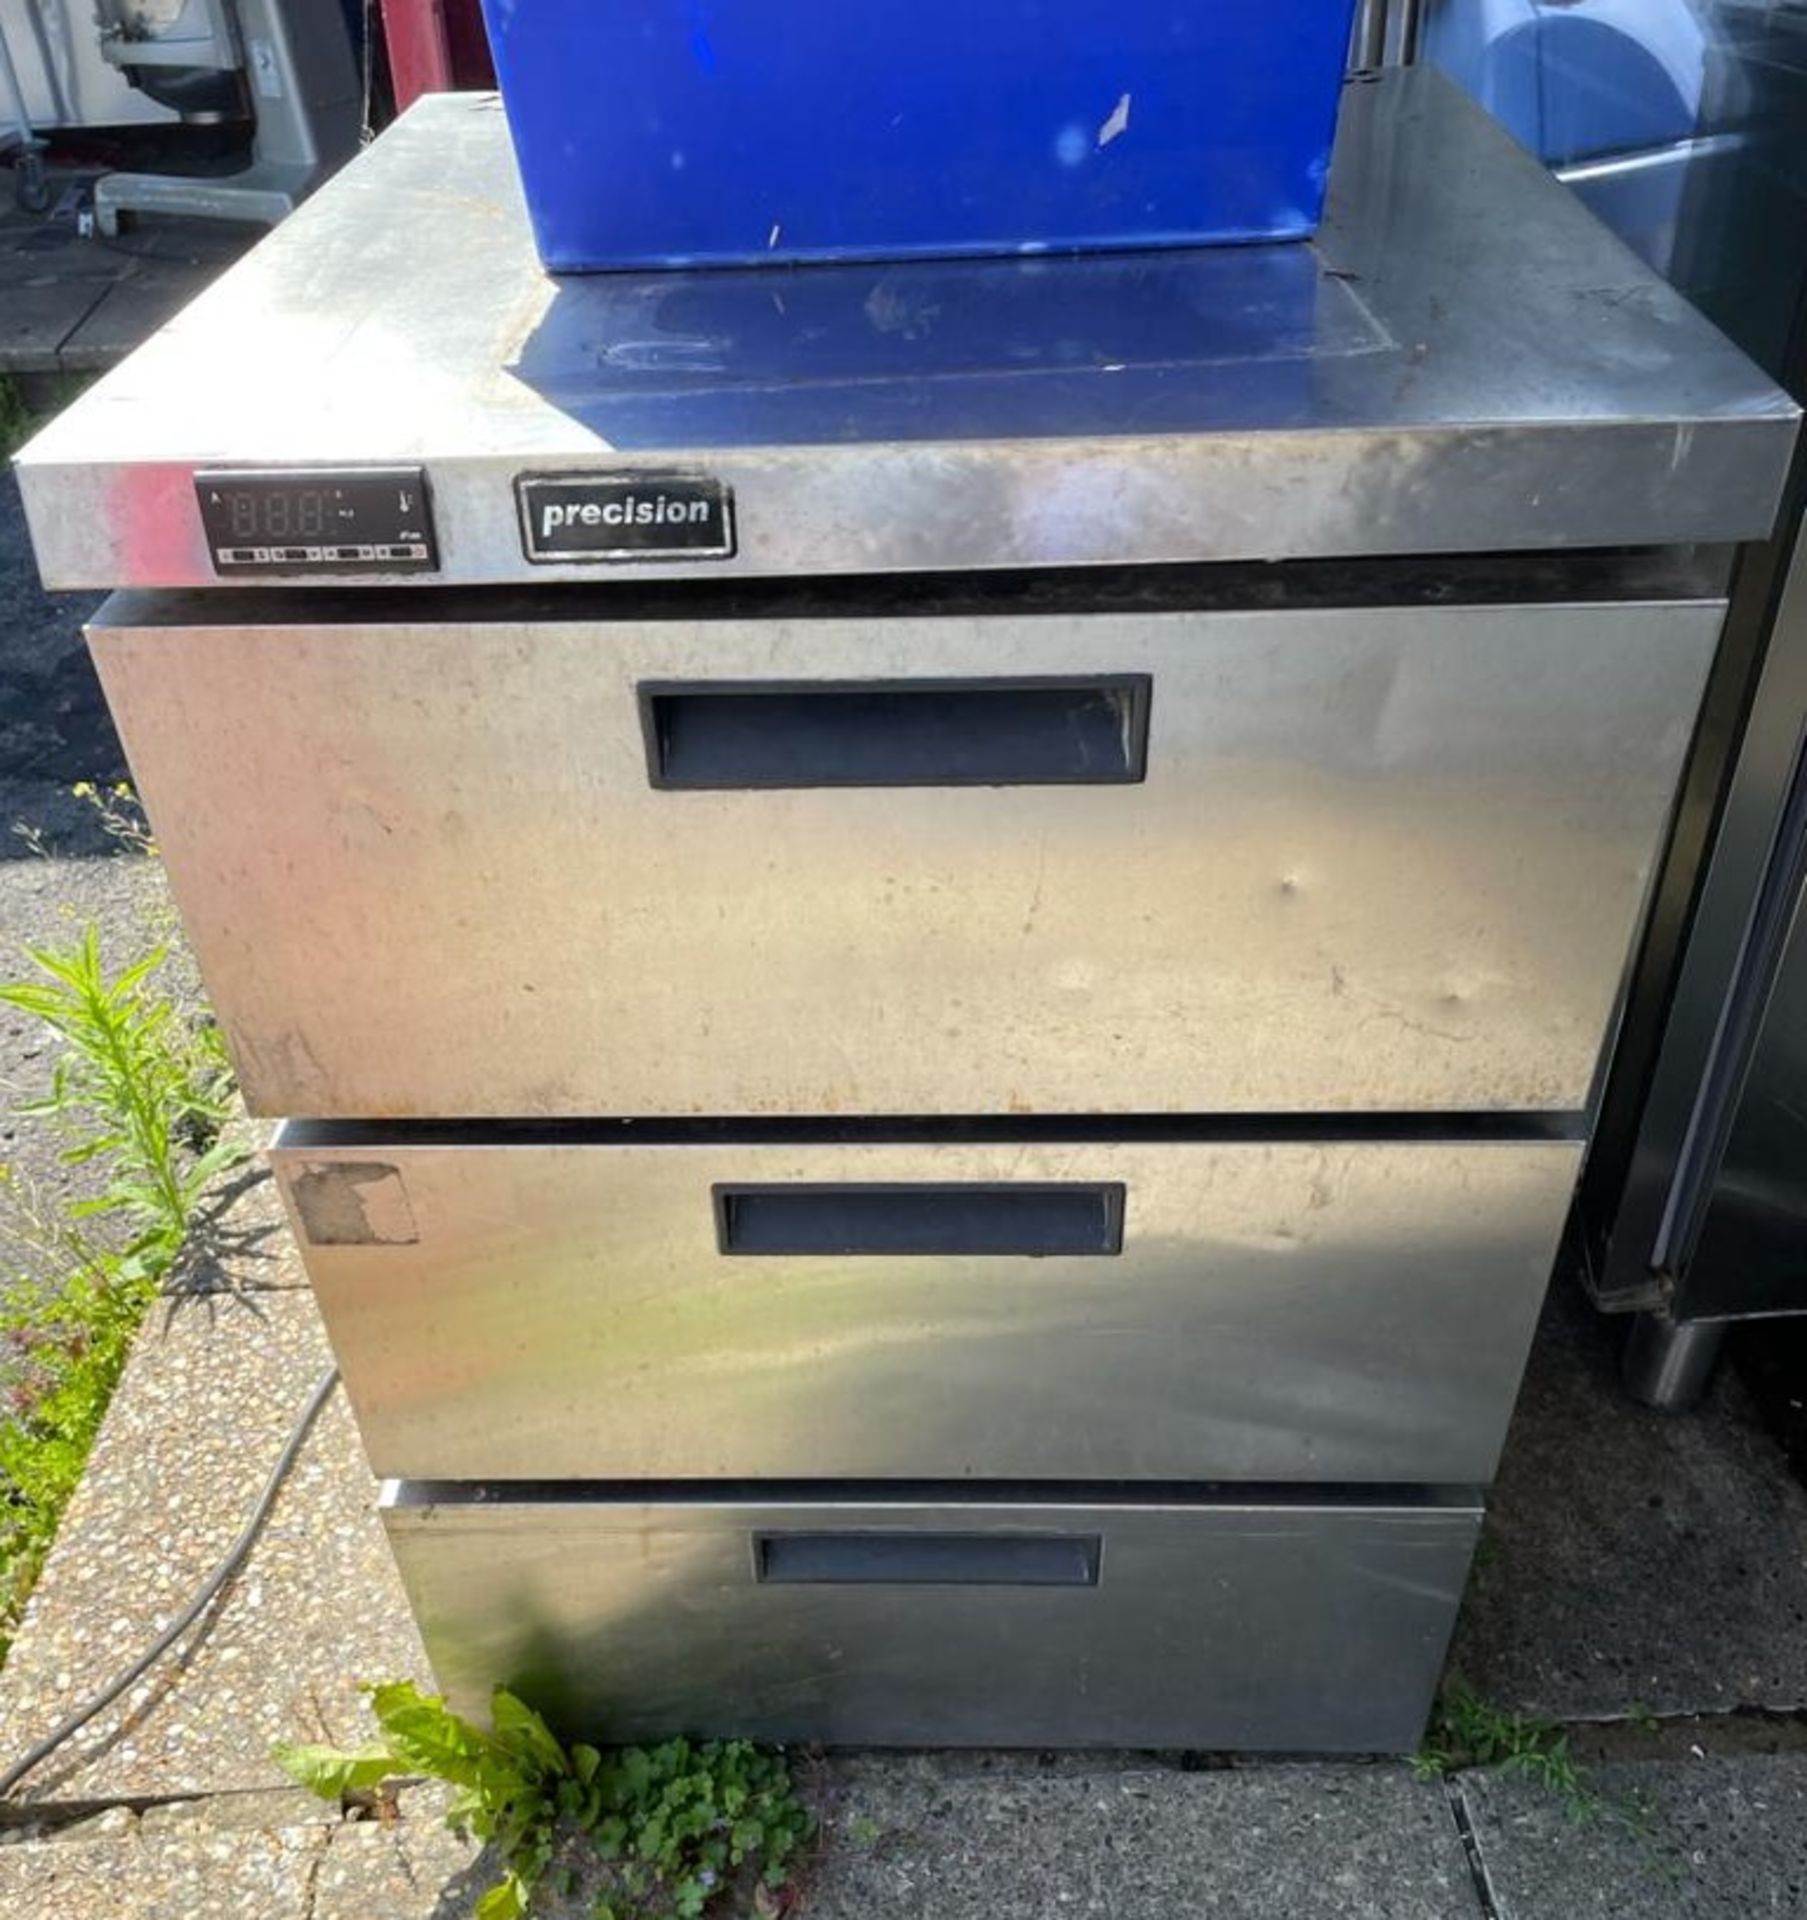 1 x Precision 3 Drawer Refrigerator - CL667 - Location: Brighton, Sussex, BN26Collections:This